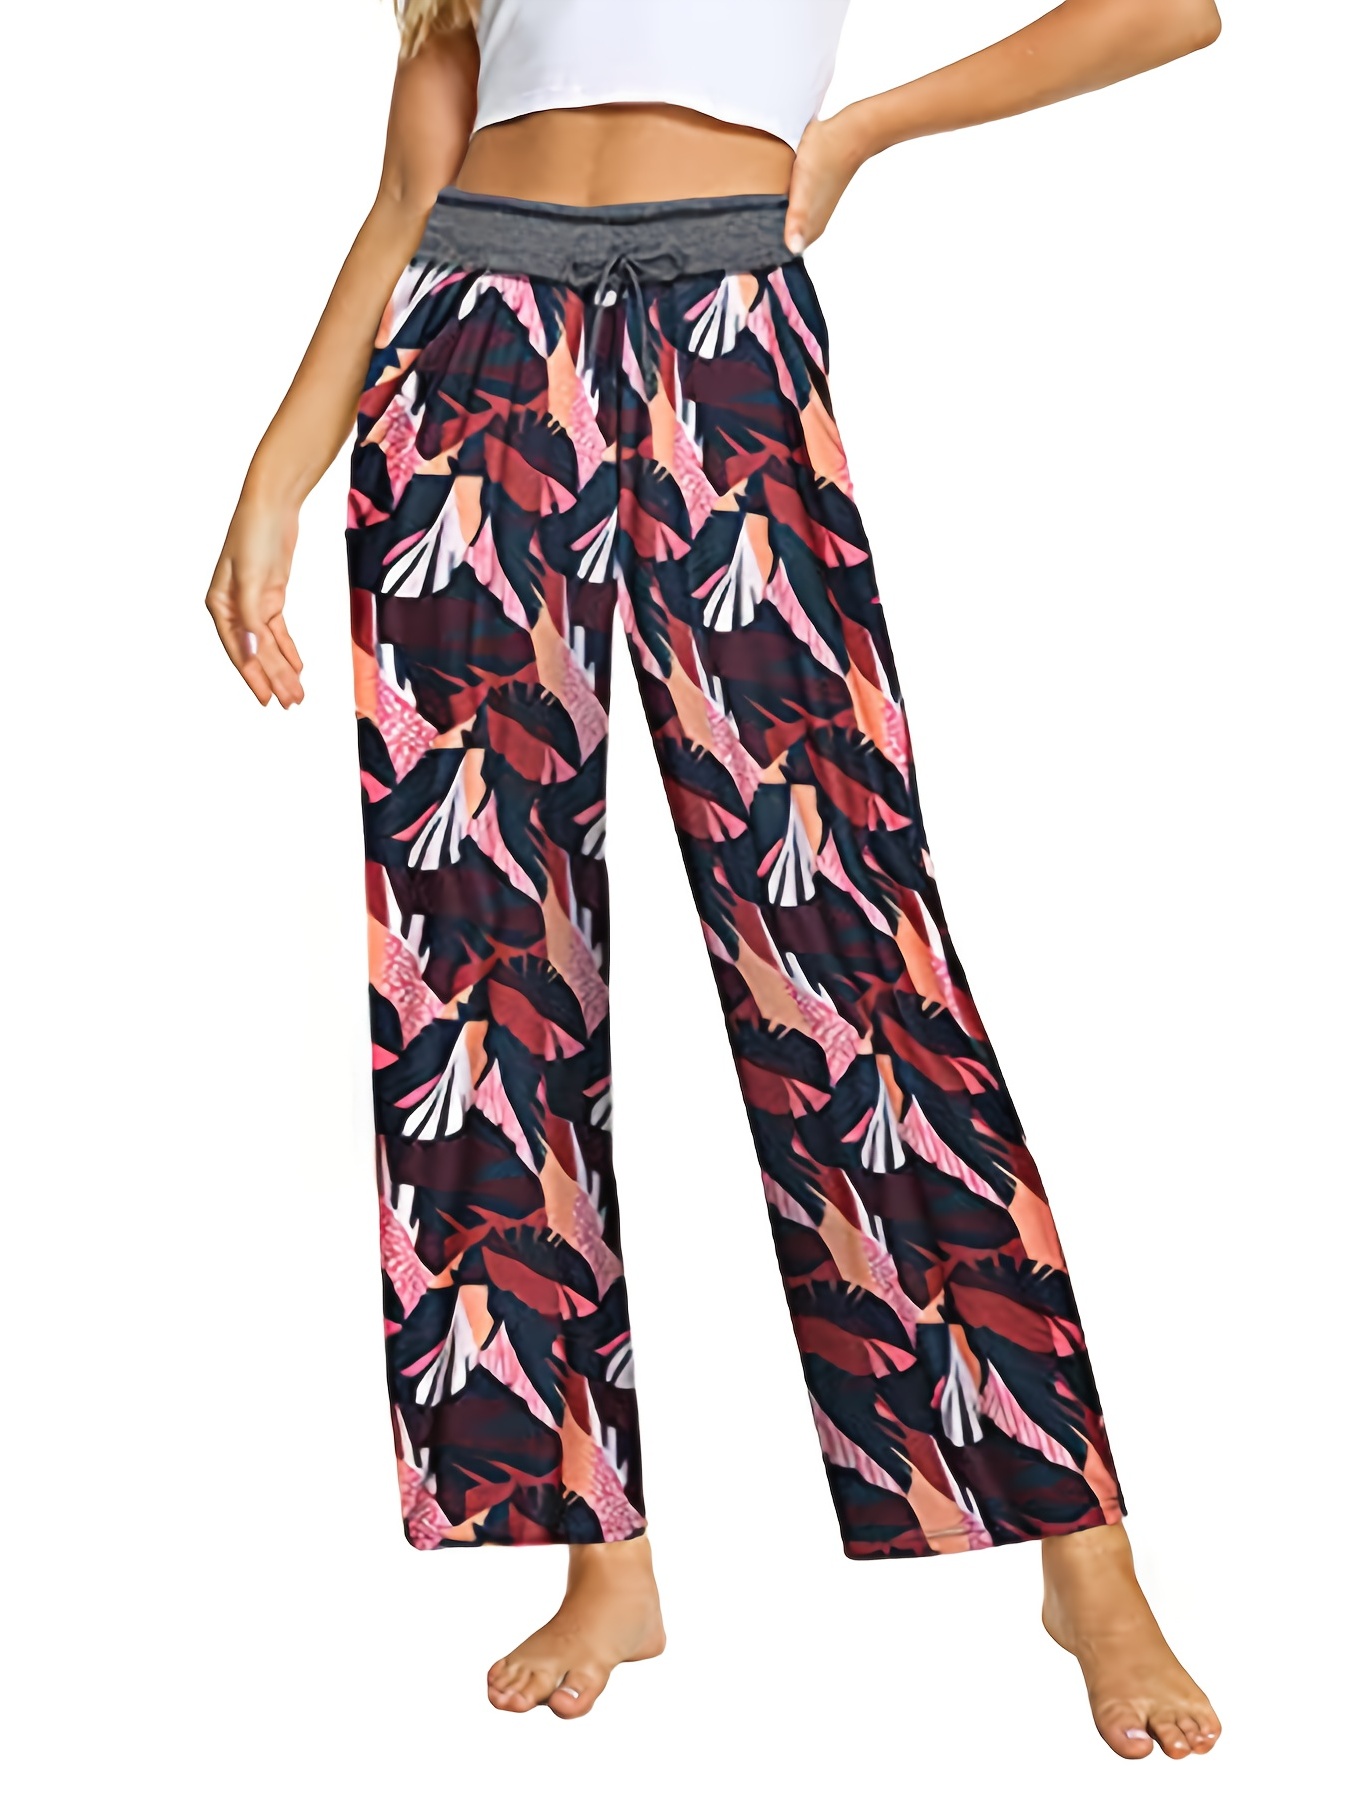 New Design Soft Print Pajama Baggy Pants Women For Women Perfect For Casual Lounge  Wear, All Seasons, And More Available In Various Sizes And Body Types Q0801  From Yanqin03, $10.09